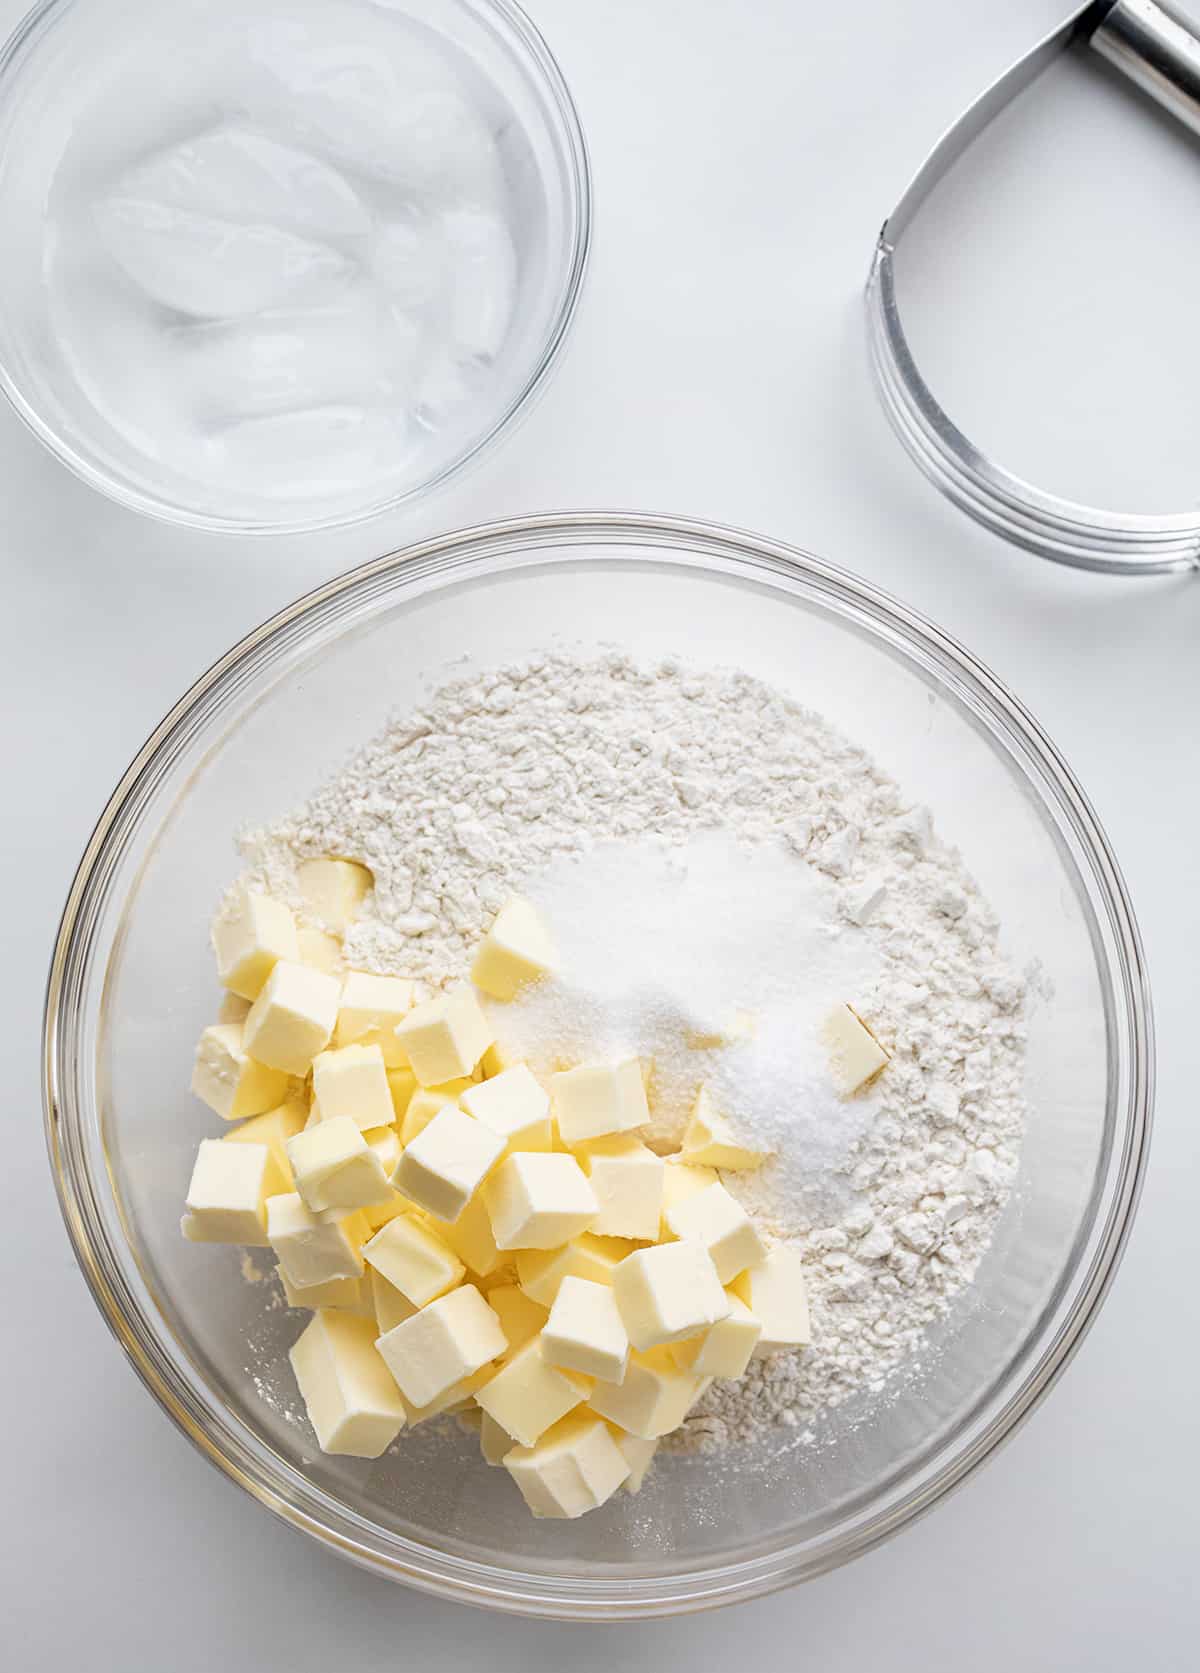 Cubed Butter in a Bowl before Baking.